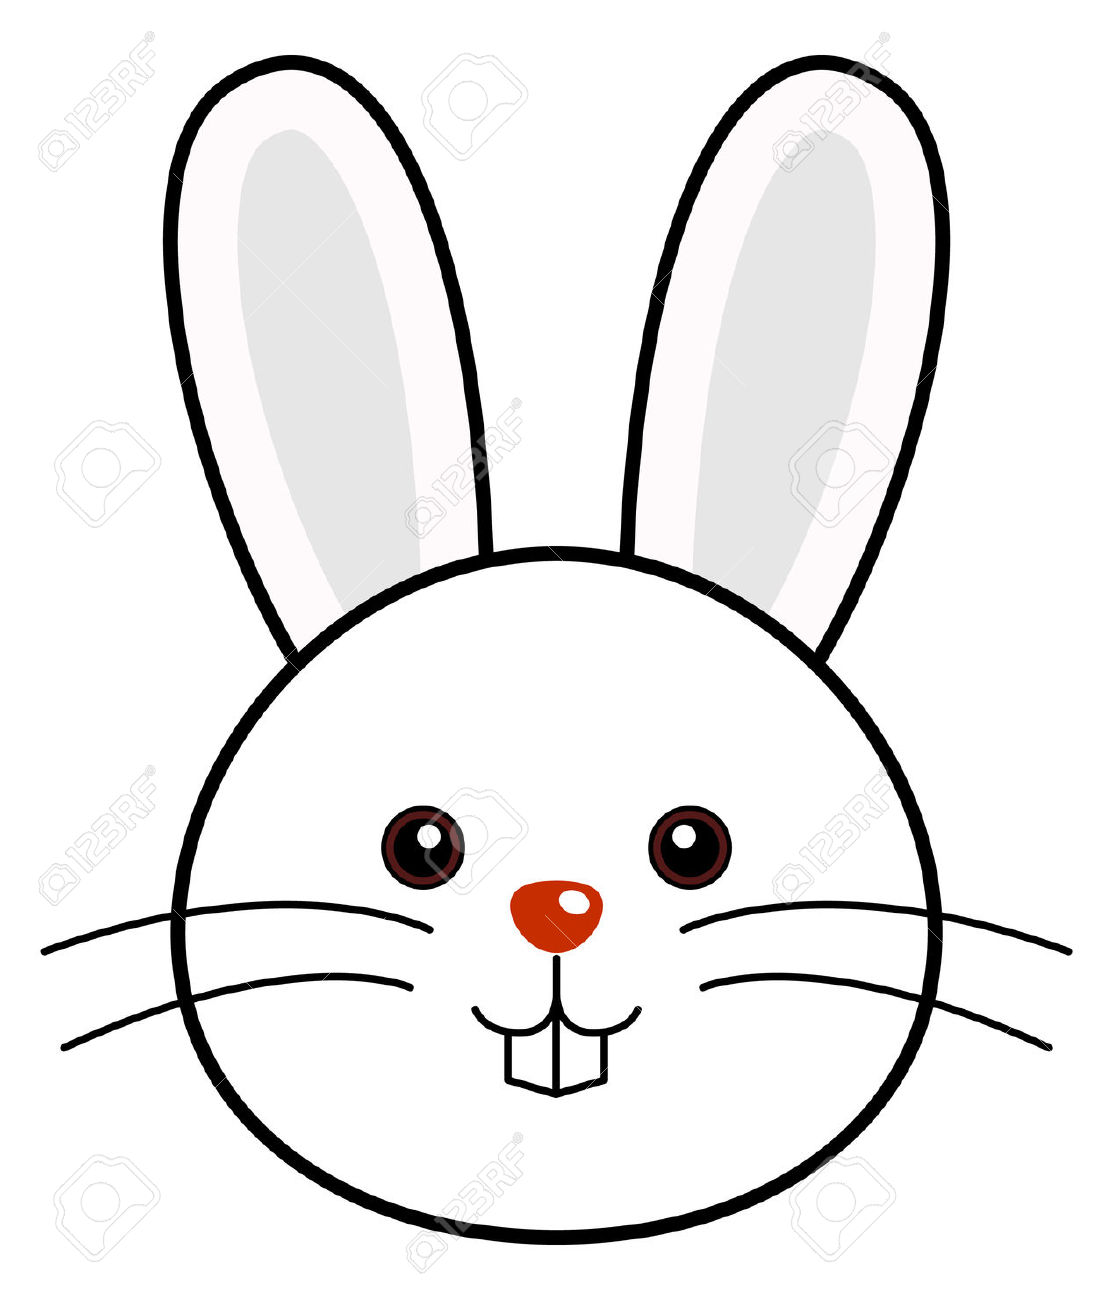 Collection Bunny Cartoon Images Pictures - Jefney